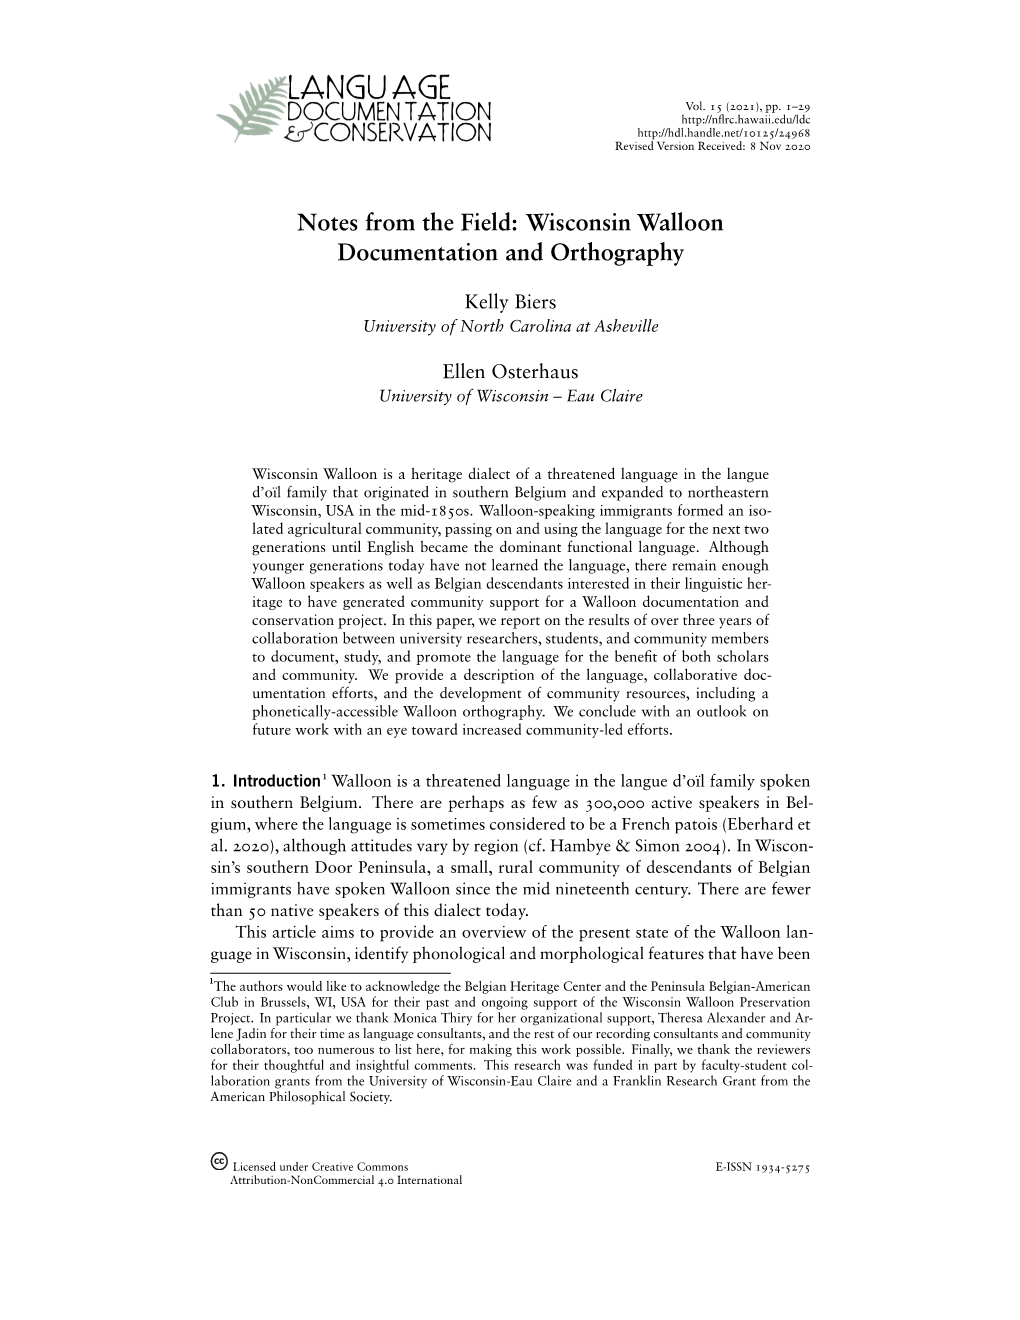 Wisconsin Walloon Documentation and Orthography